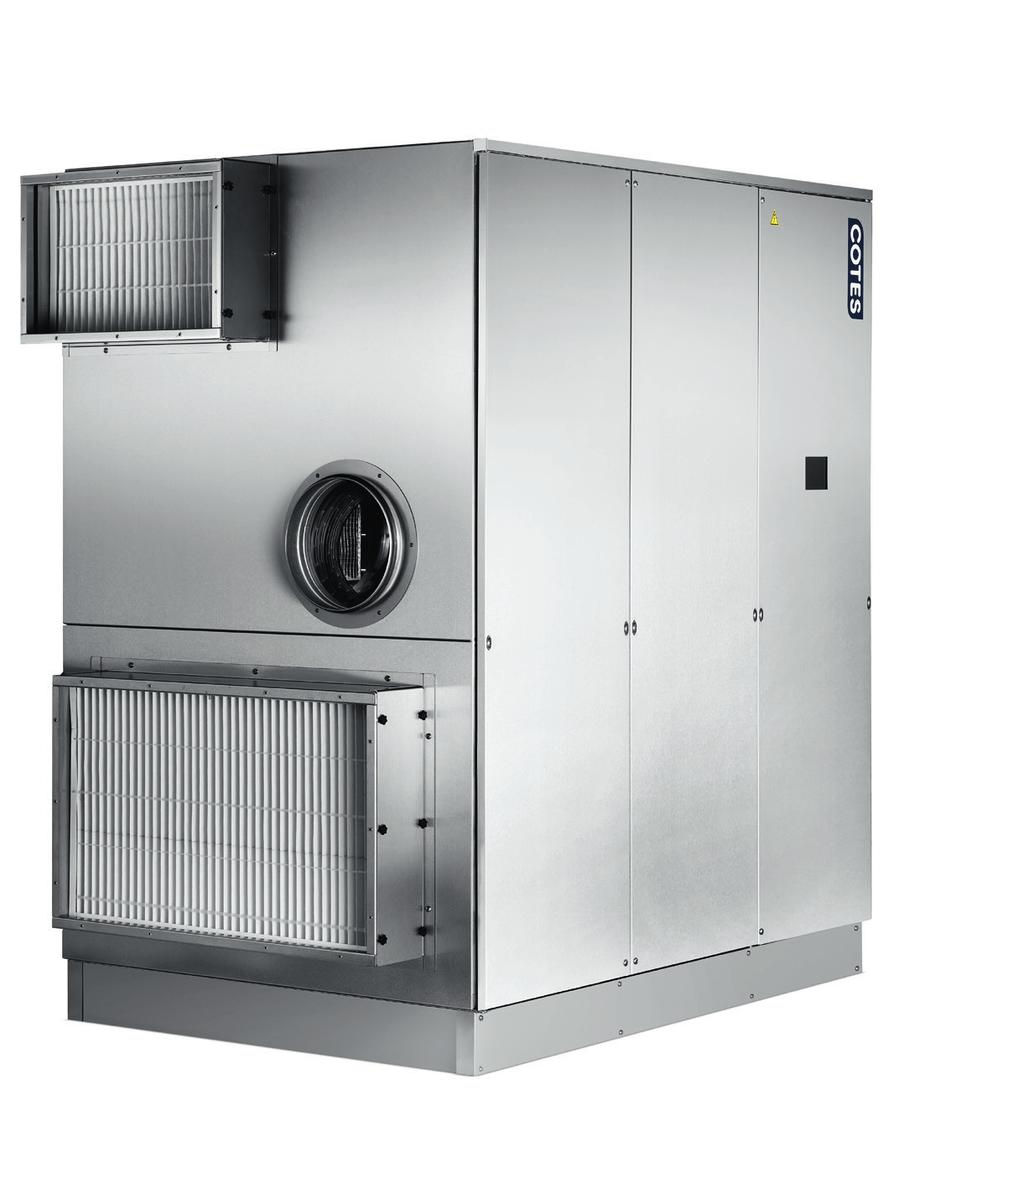 COTES ALL-ROUND THE C105-RANGE IDEAL FOR USE IN Pharmaceutical production Cold stores/freezer facilities Waterworks Virtually any kind of indoor space OPTIONAL EQUIPMENT Additional temperature and